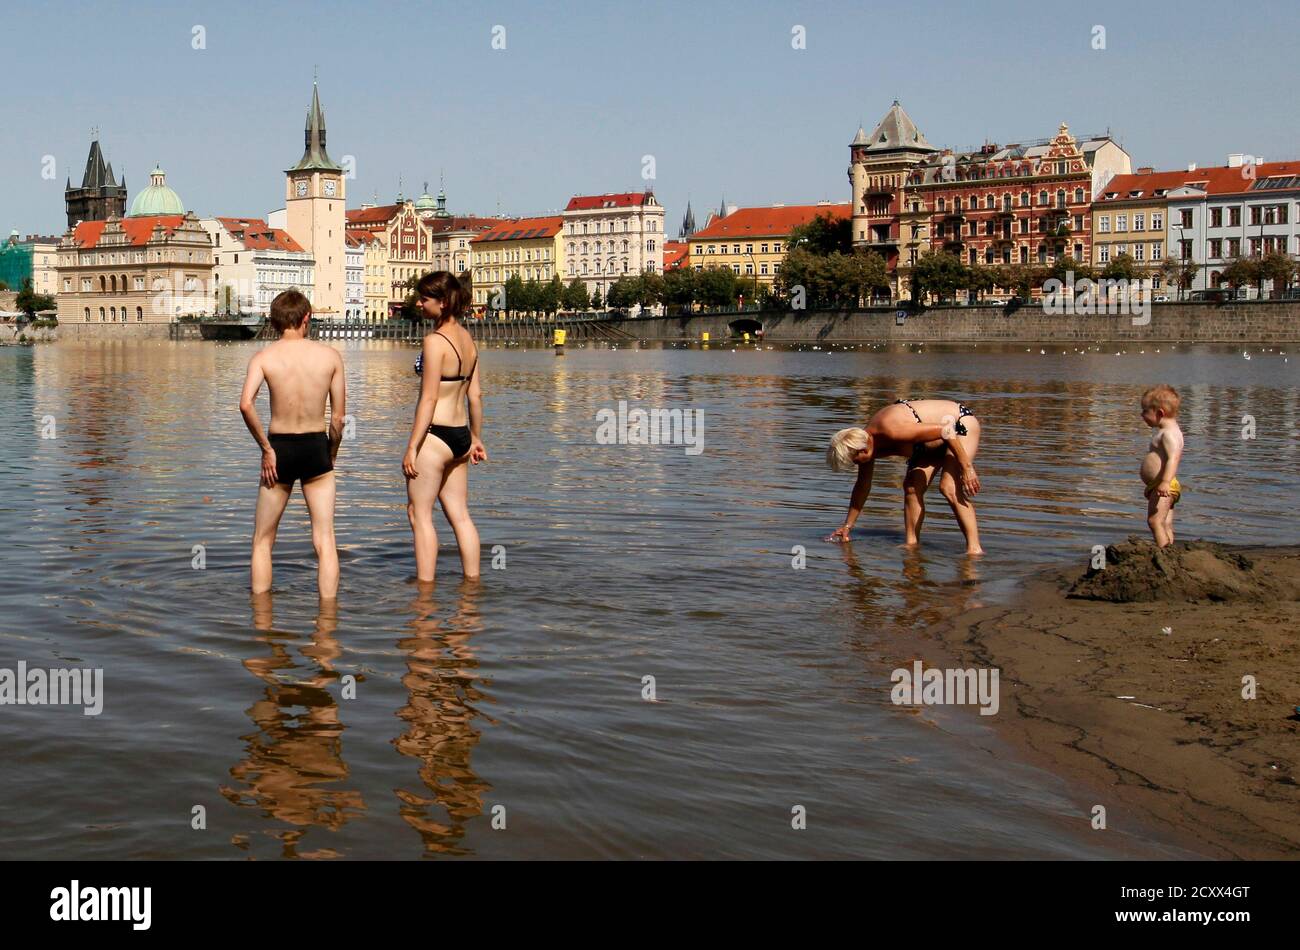 People cool off in the Vltava river in central Prague August 20, 2012. An unusual tropical heat wave with temperatures reaching over 38 degrees Celsius (100 degrees Fahrenheit) hits continental Europe.    REUTERS/Petr Josek (CZECH REPUBLIC - Tags: SOCIETY ENVIRONMENT CITYSPACE) Stock Photo